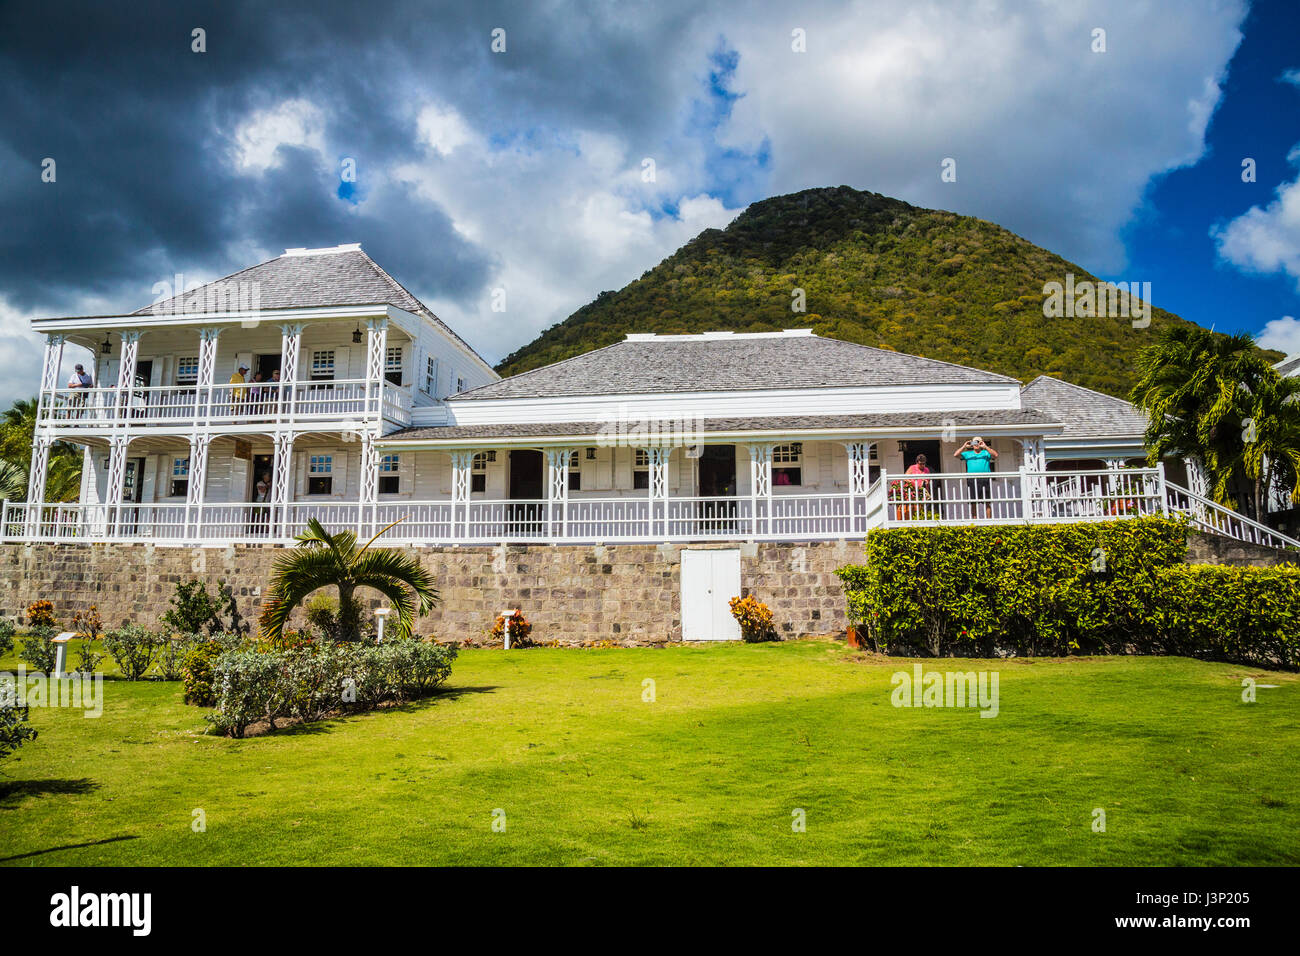 Great Fairview house on island of St Kitts Stock Photo